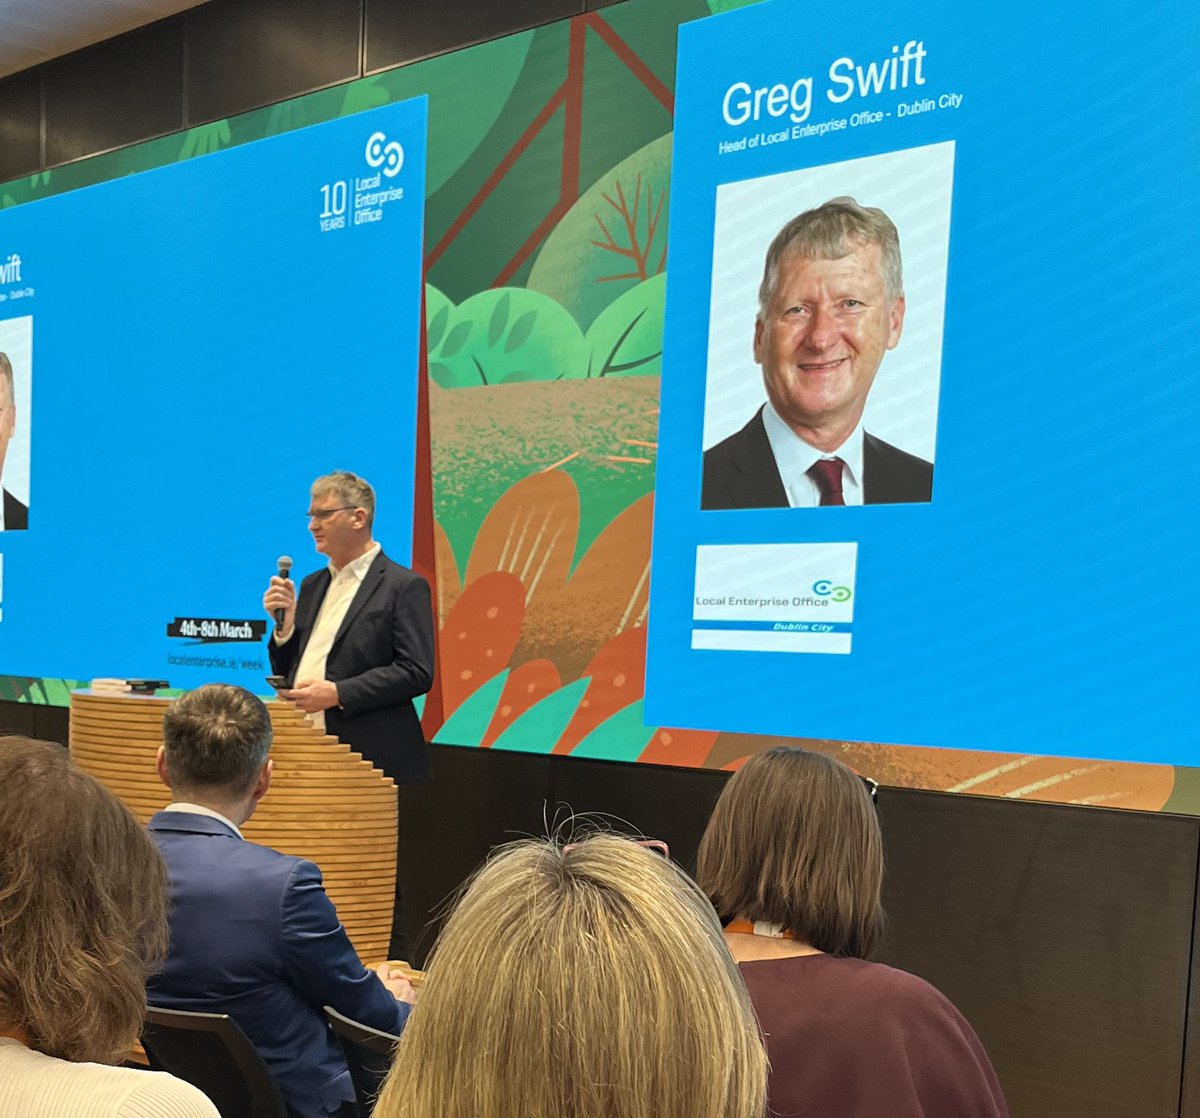 Both @GregSwift10 and Minister of State @nealerichmond encouraged small to medium sized businesses to attend as many of the @LEODublinCity #LocalEnterpriseWeek events this week at launch at @salesforce Tower Dublin.